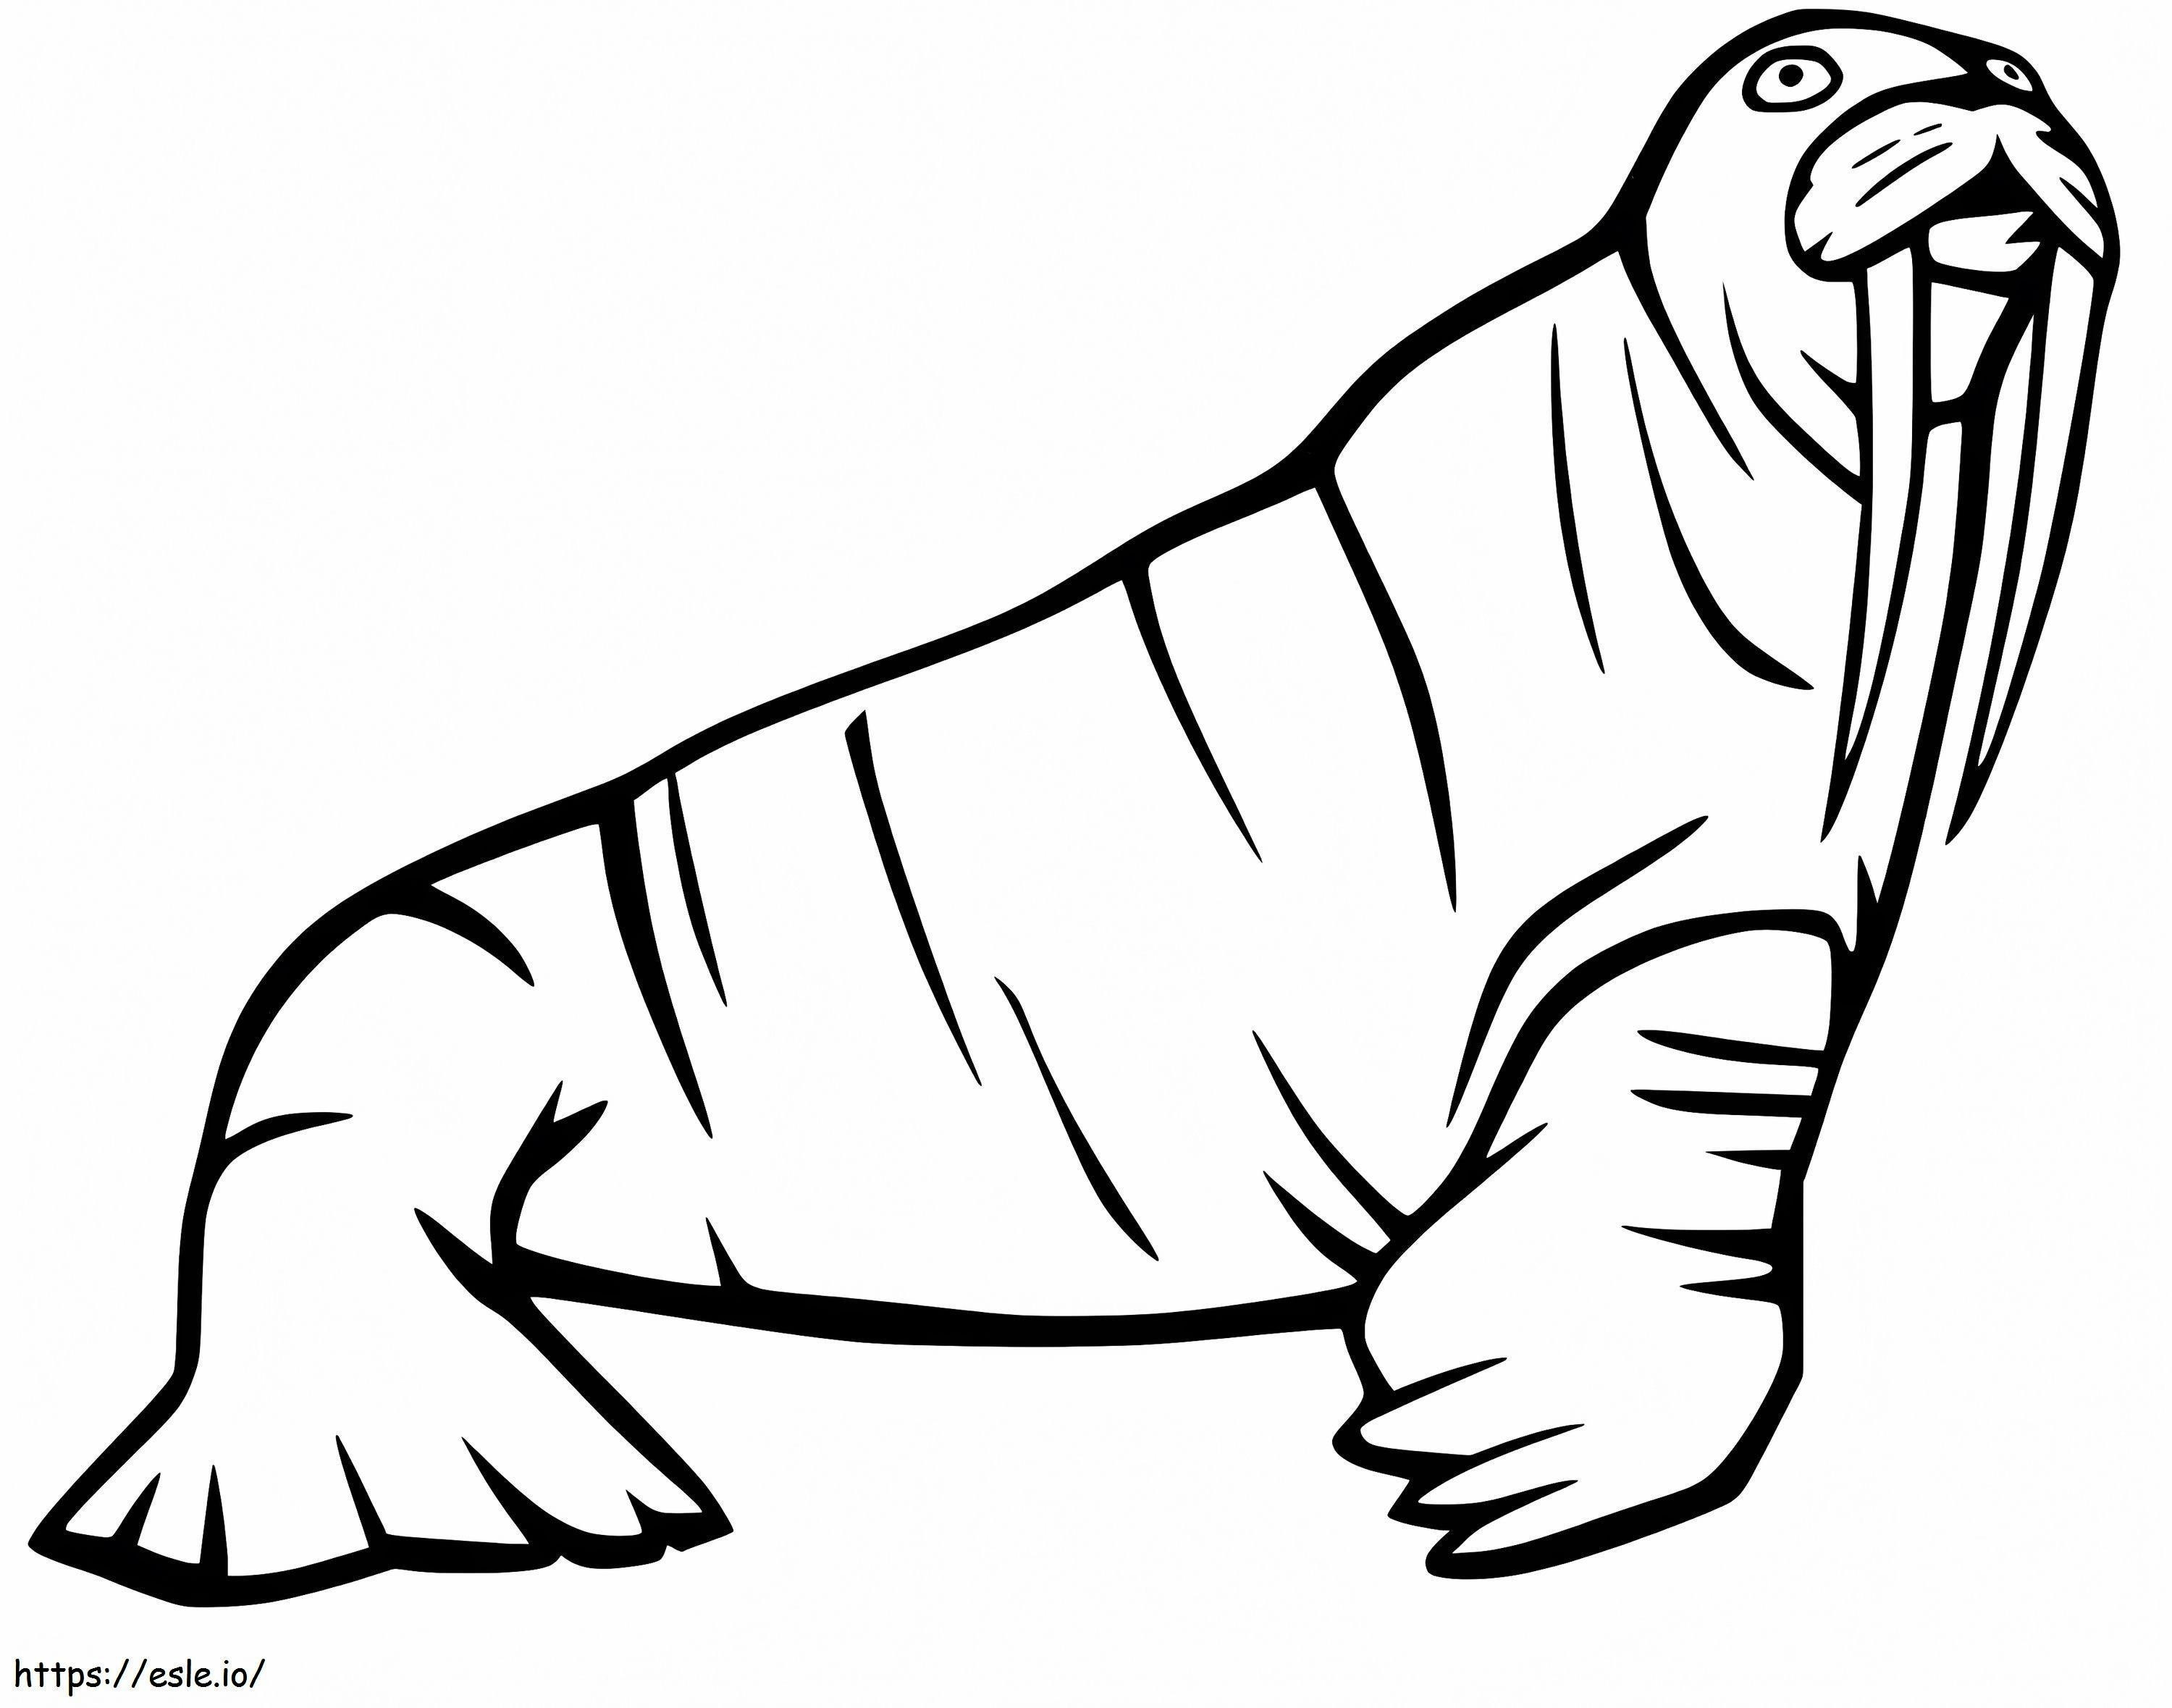 Walrus 10 coloring page